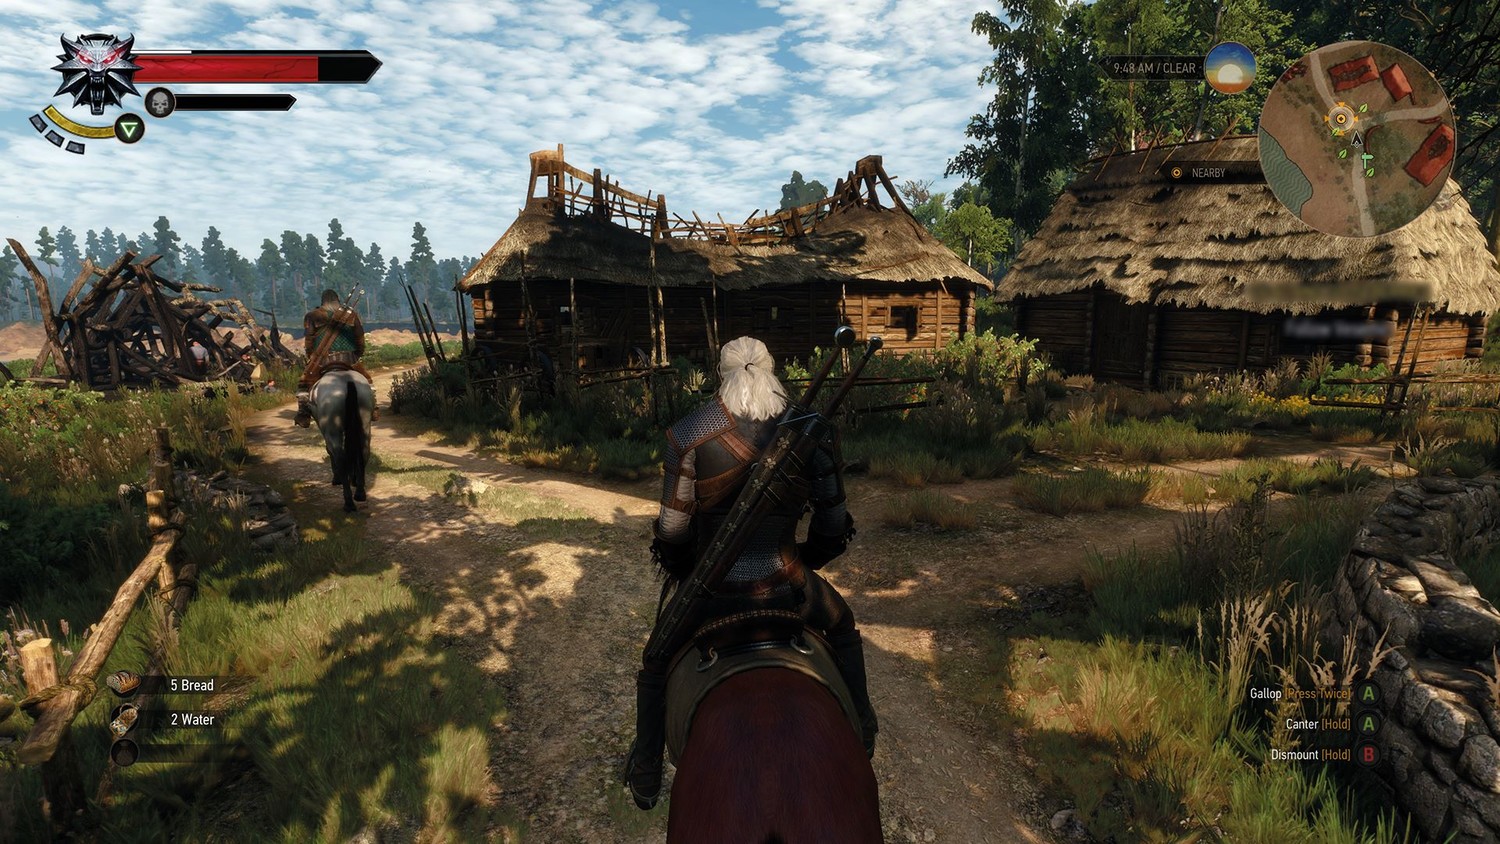 Скриншот 1 к игре The Witcher 3: Wild Hunt  + The Witcher 3 HD Reworked Project (mod v. 12.0) (2015) PC | Repack от xatab